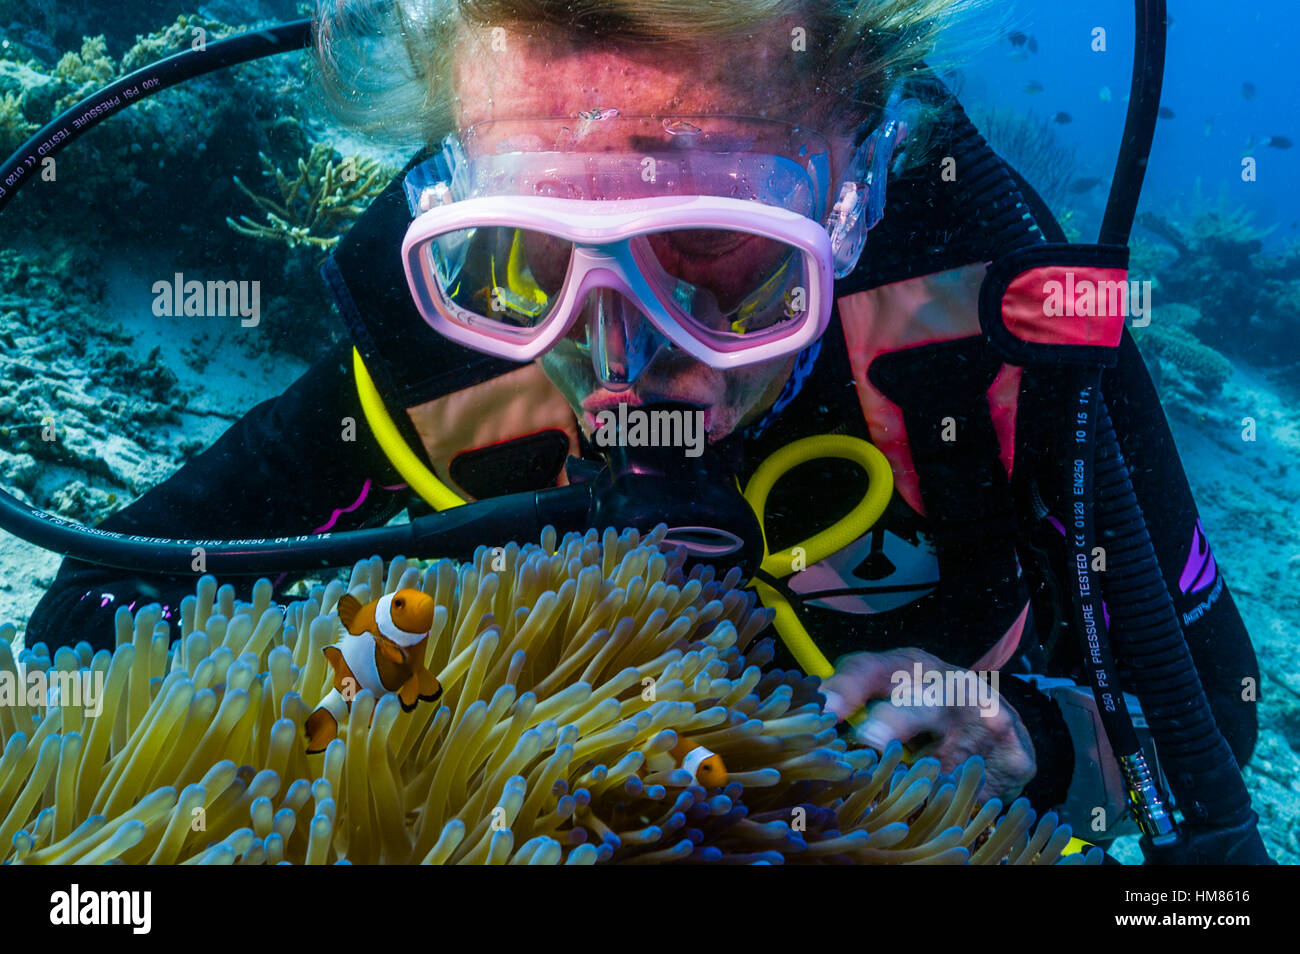 A scuba diver interacts with a Ocellaris Clownfish in a sea anemone. Stock Photo